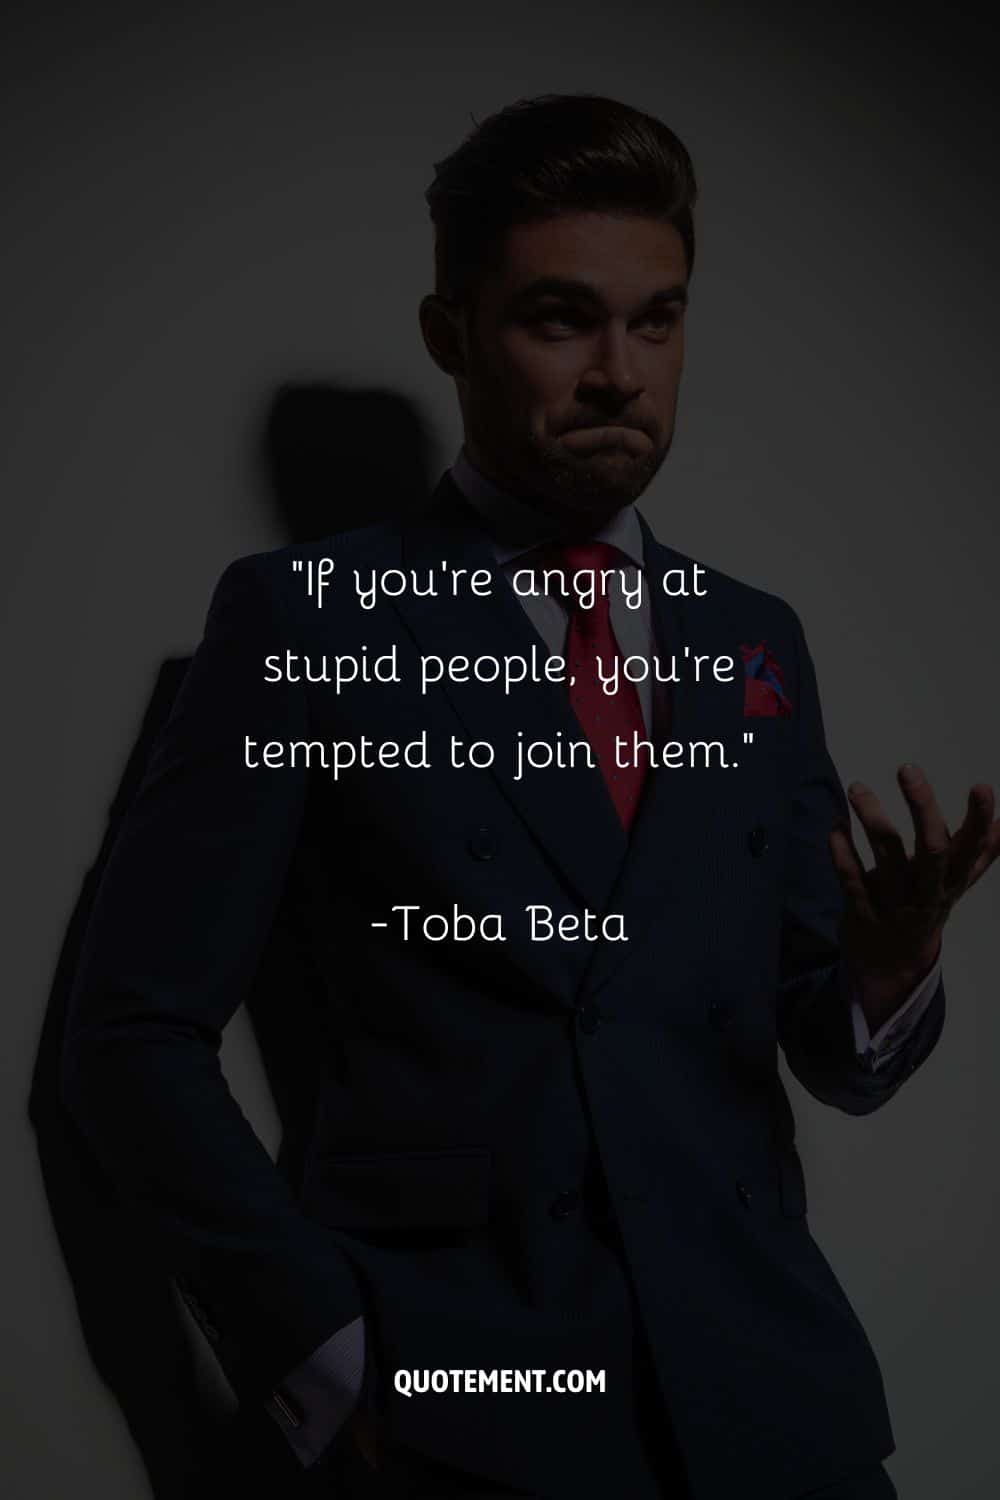 “If you're angry at stupid people, you're tempted to join them.”